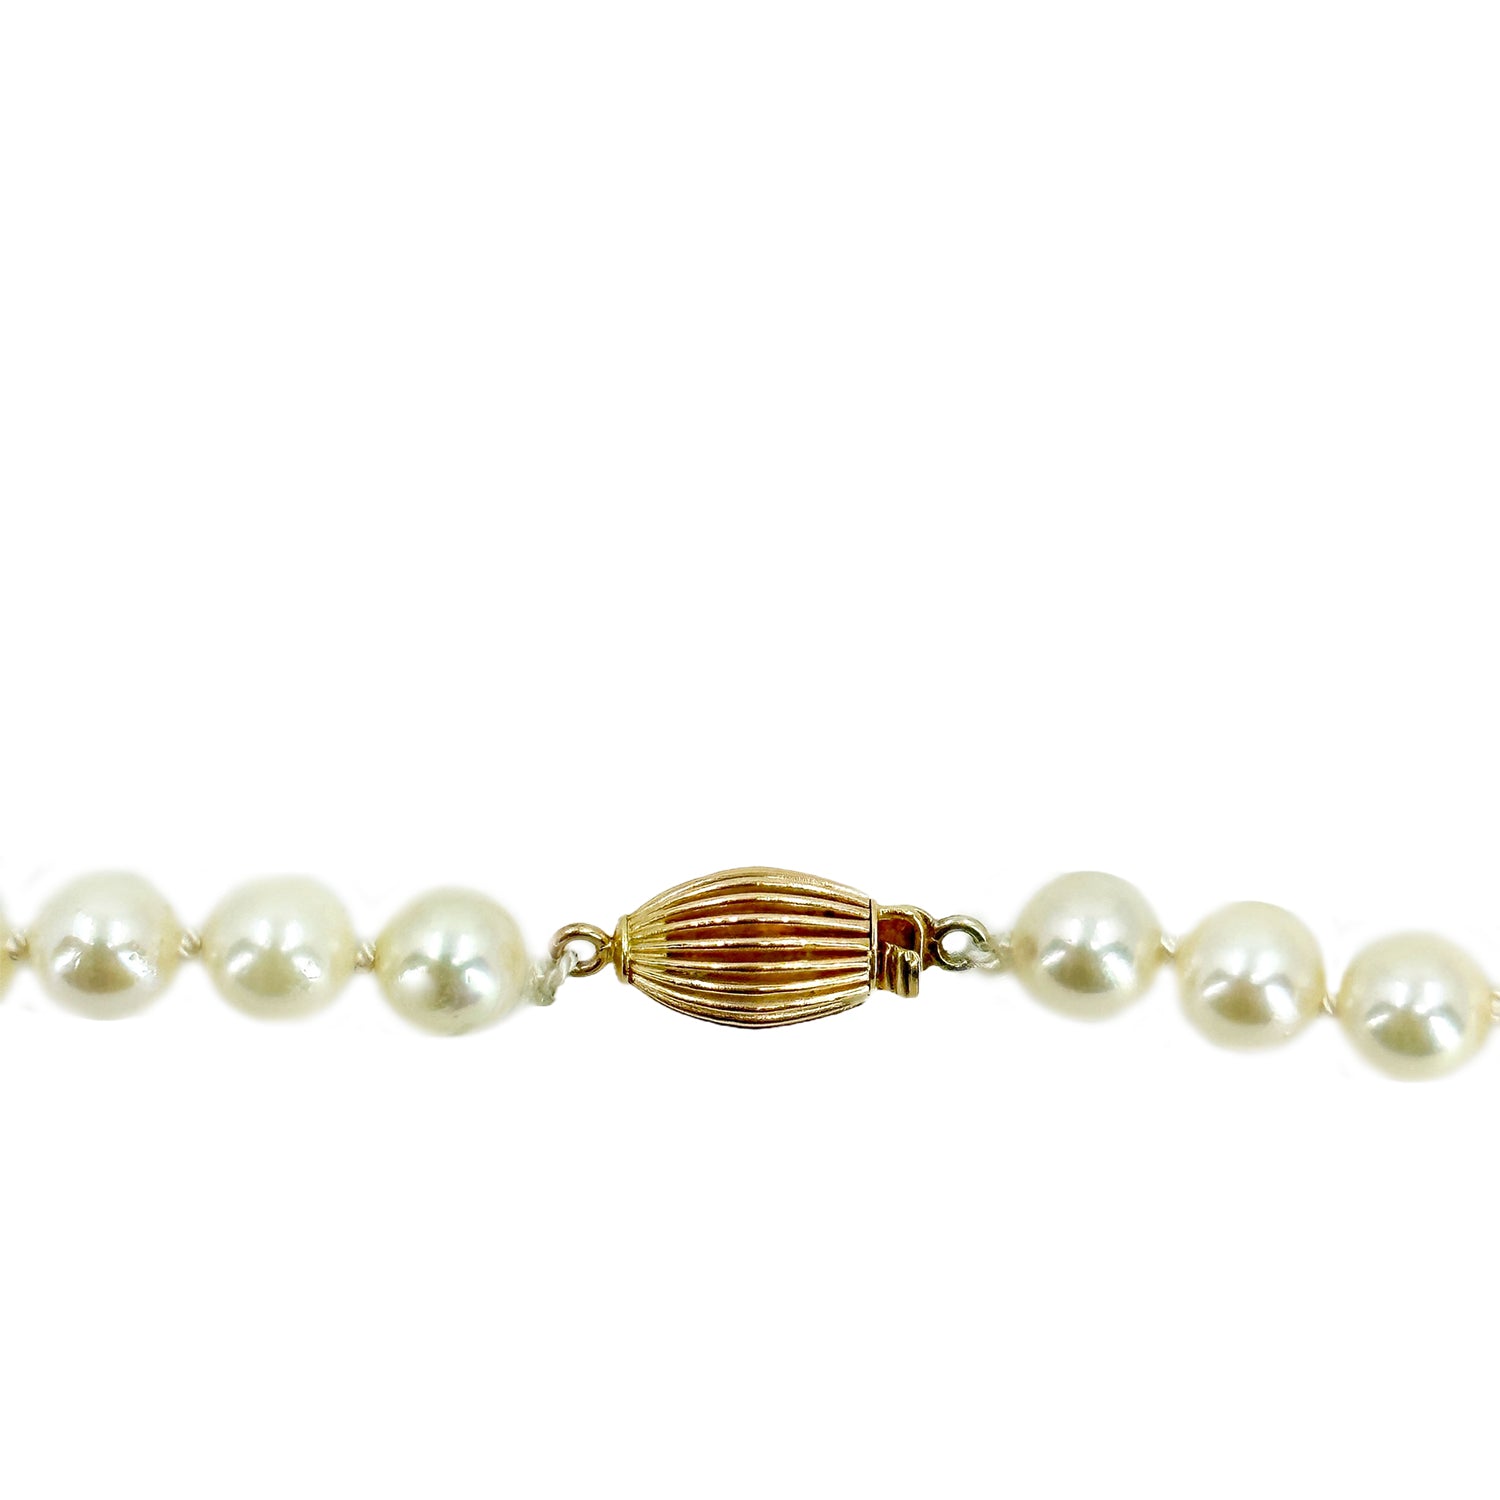 Vintage Opera Length Saltwater Japanese Akoya Cultured Pearl Necklace Strand - 14K Yellow Gold 29 Inch